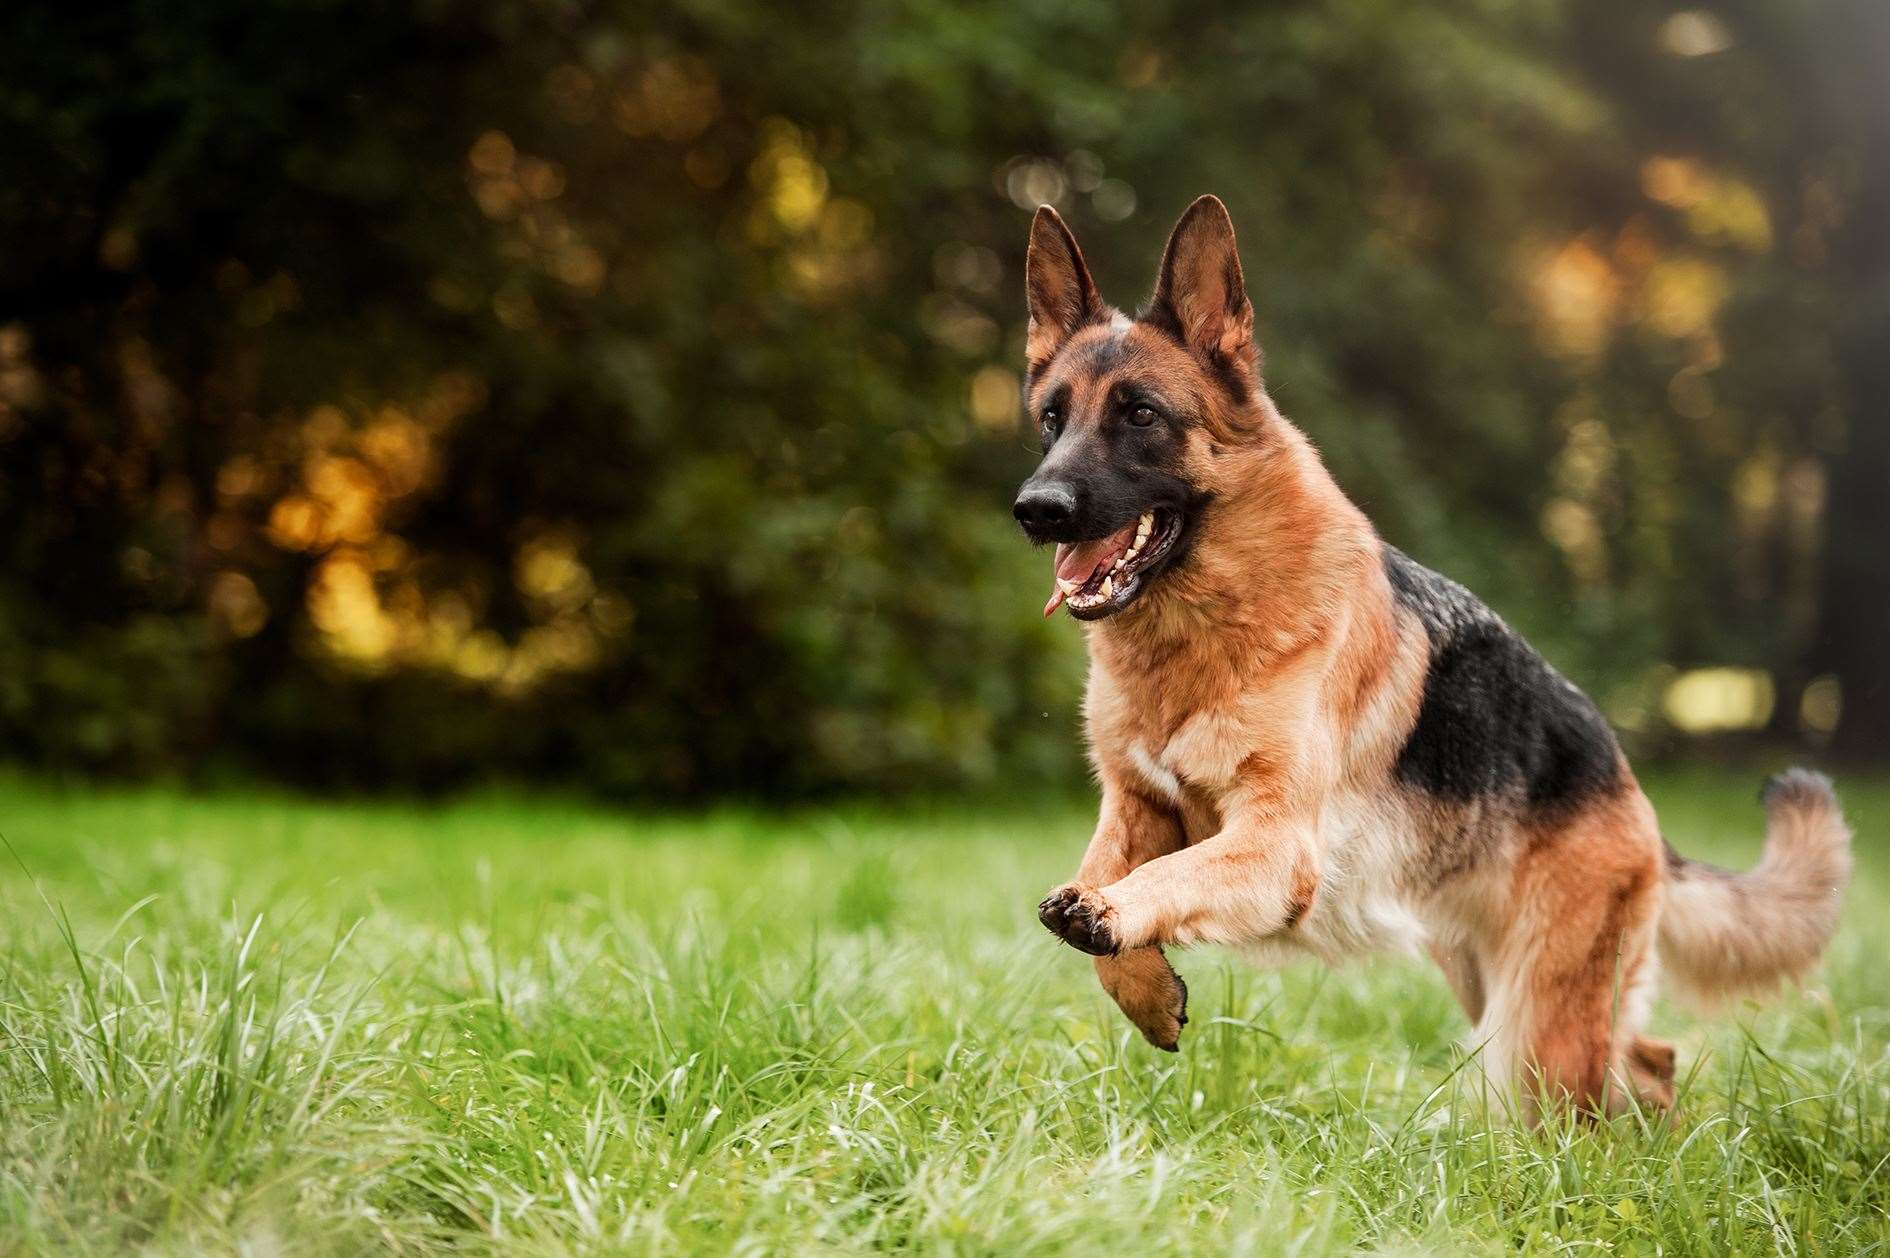 If your dog is finding exercise more difficult it could be a sign of heart disease.